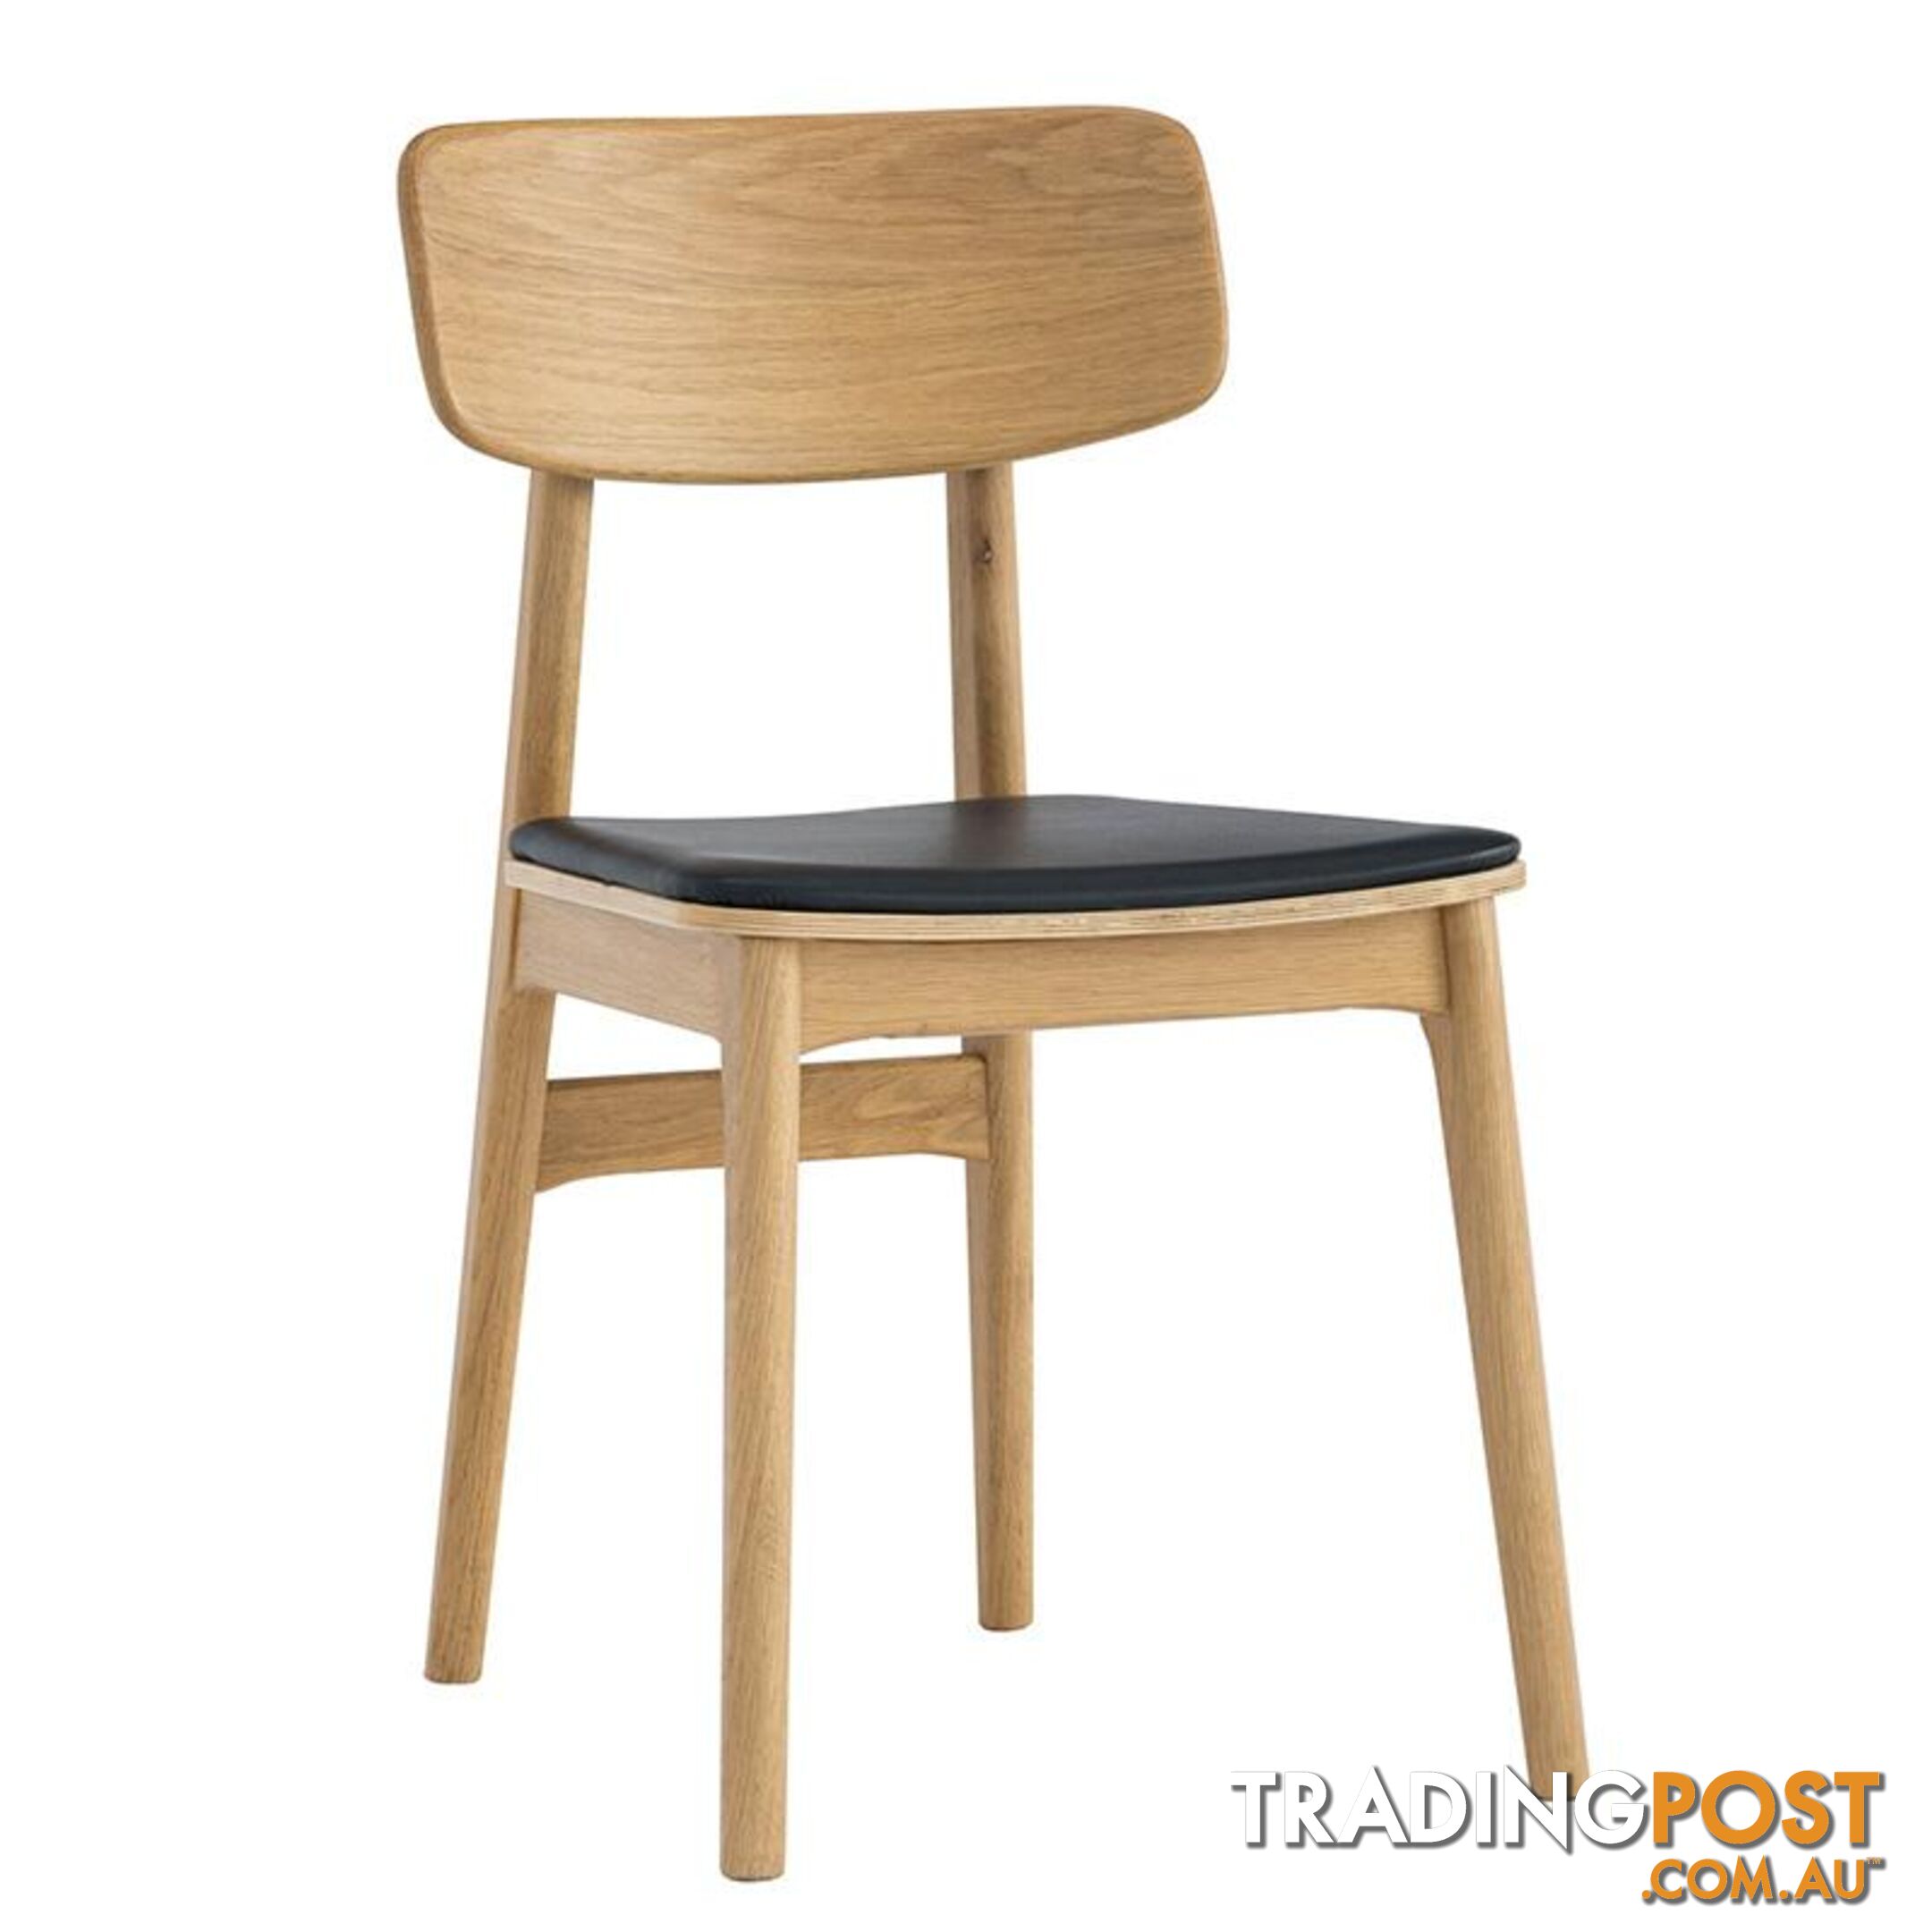 TACY Dining Chair - Natural & Black - 38440202 - 5704745091259